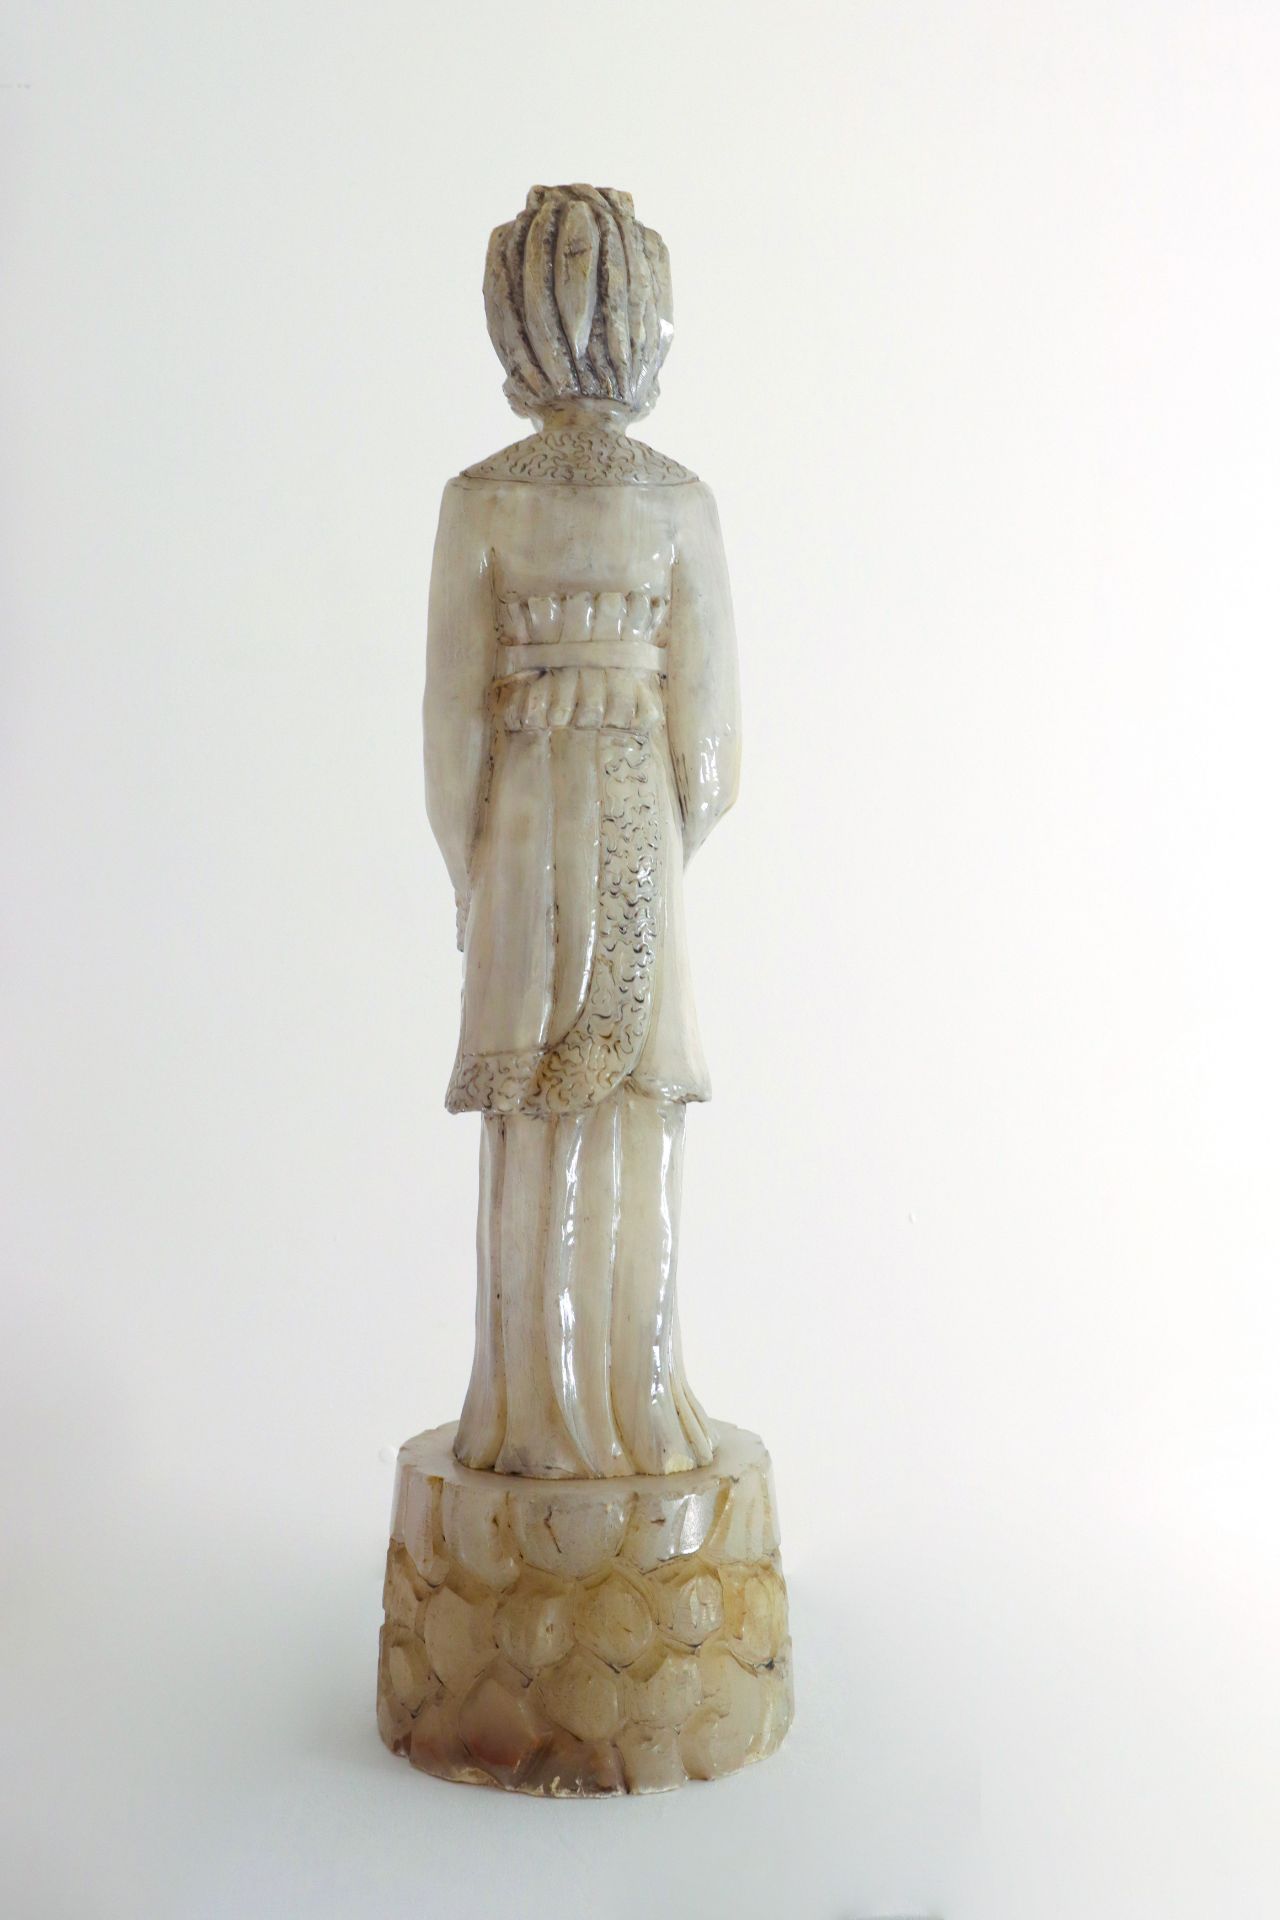 Sculptured Statue in white Jade - Image 2 of 3